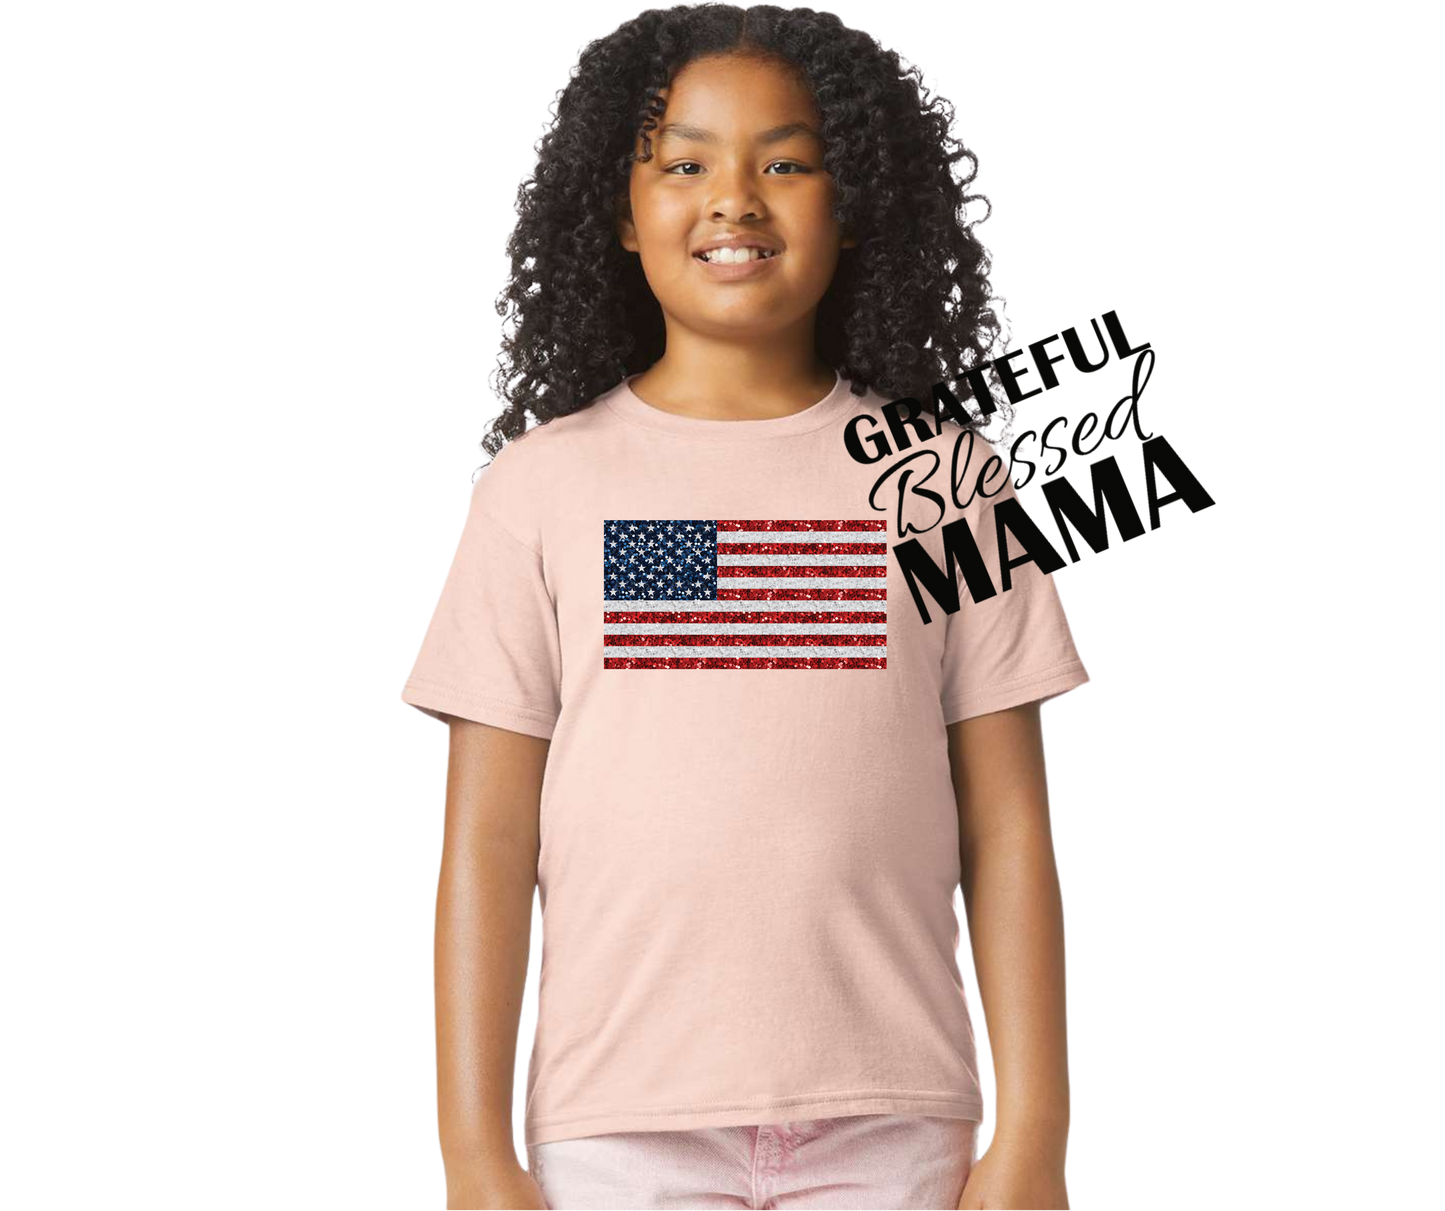 Faux Sparkly American Flag Shirt